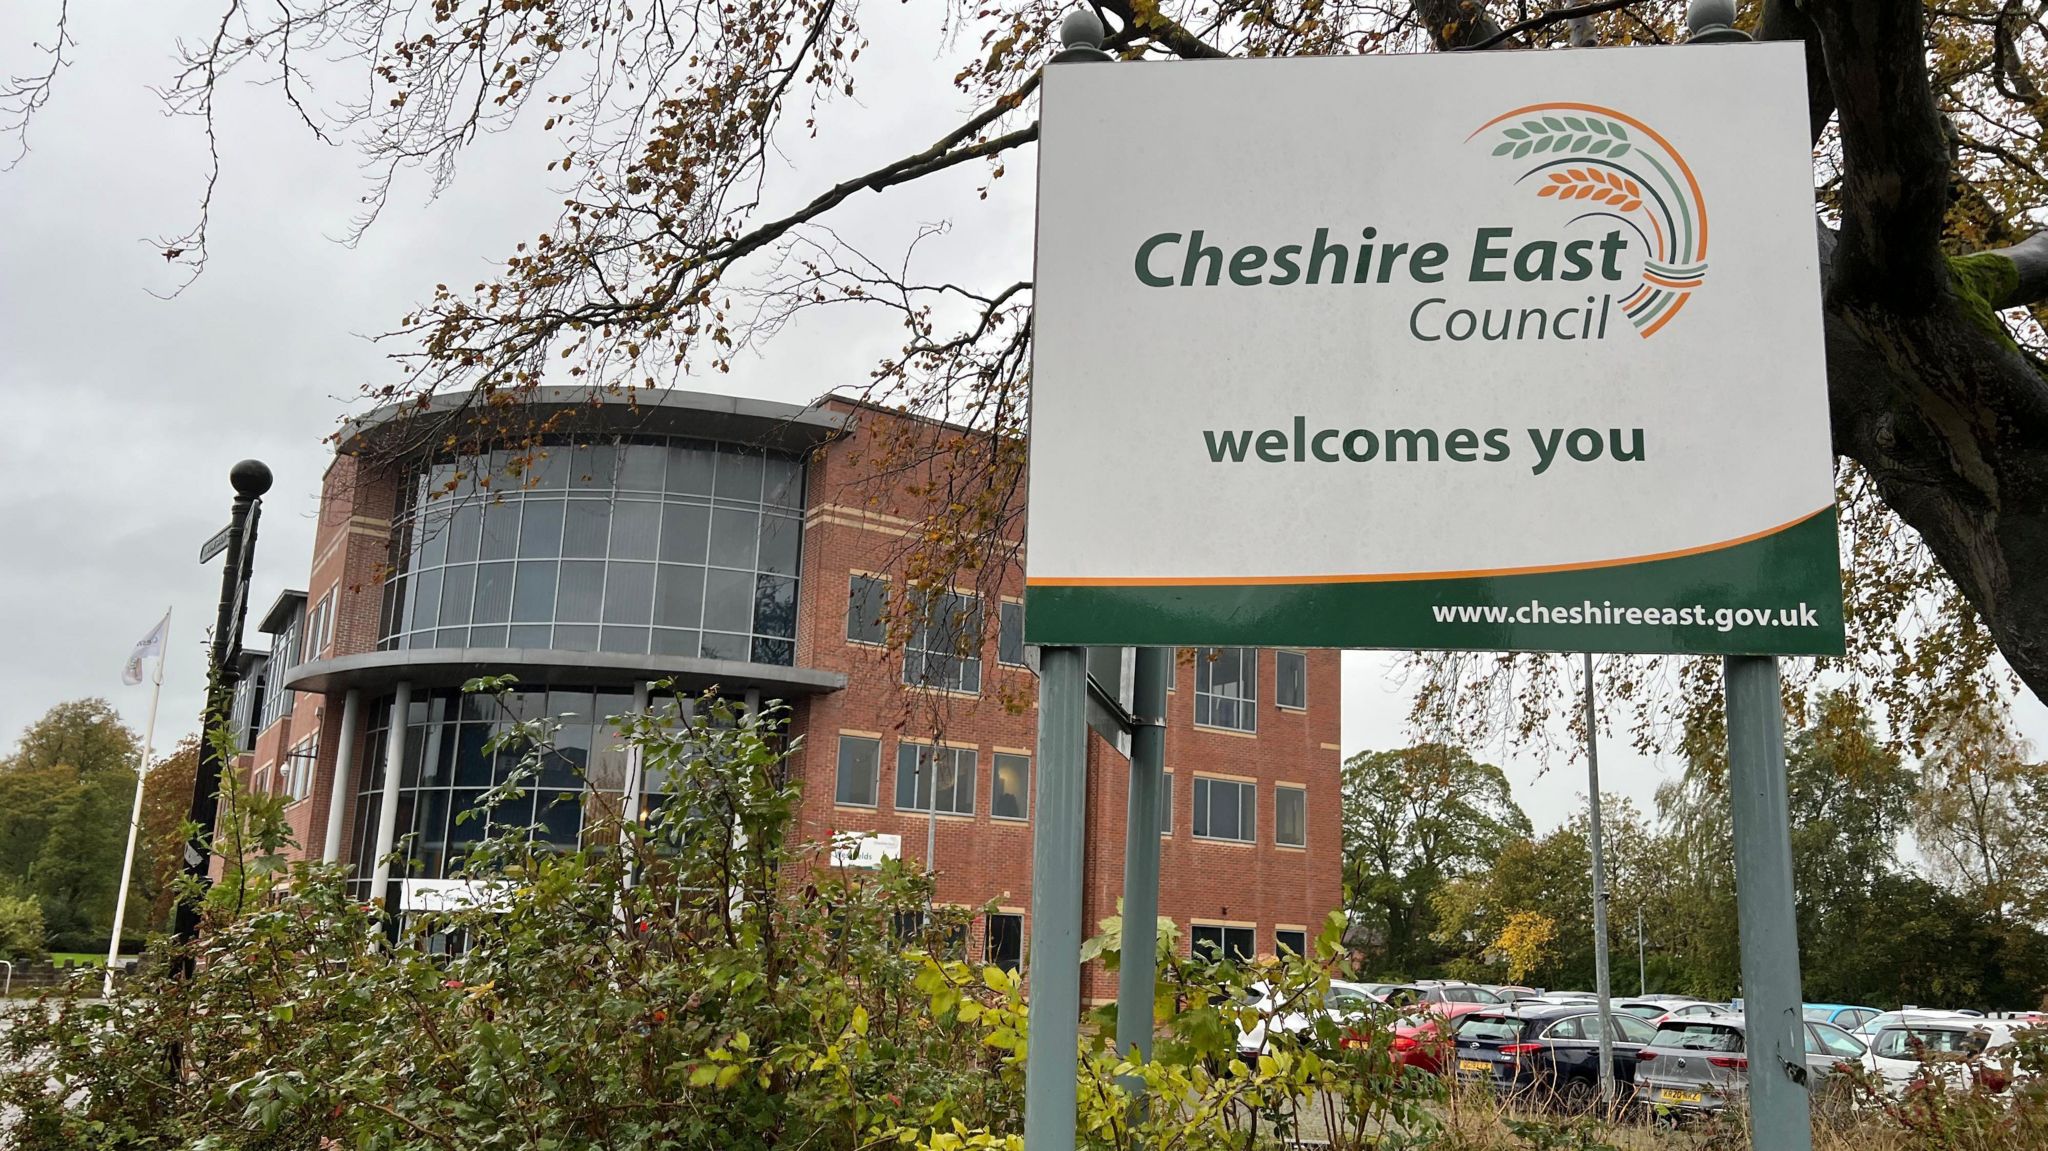 Cheshire East Council's headquarters